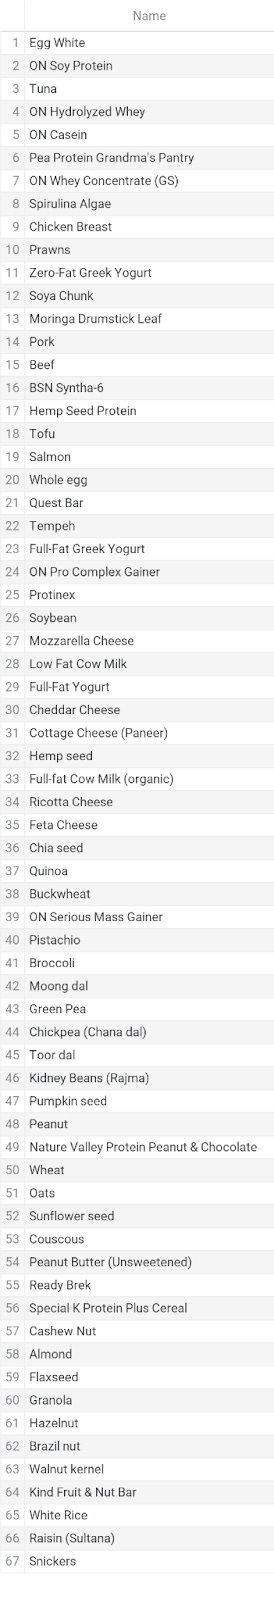 List showing overall ranking of protein sources